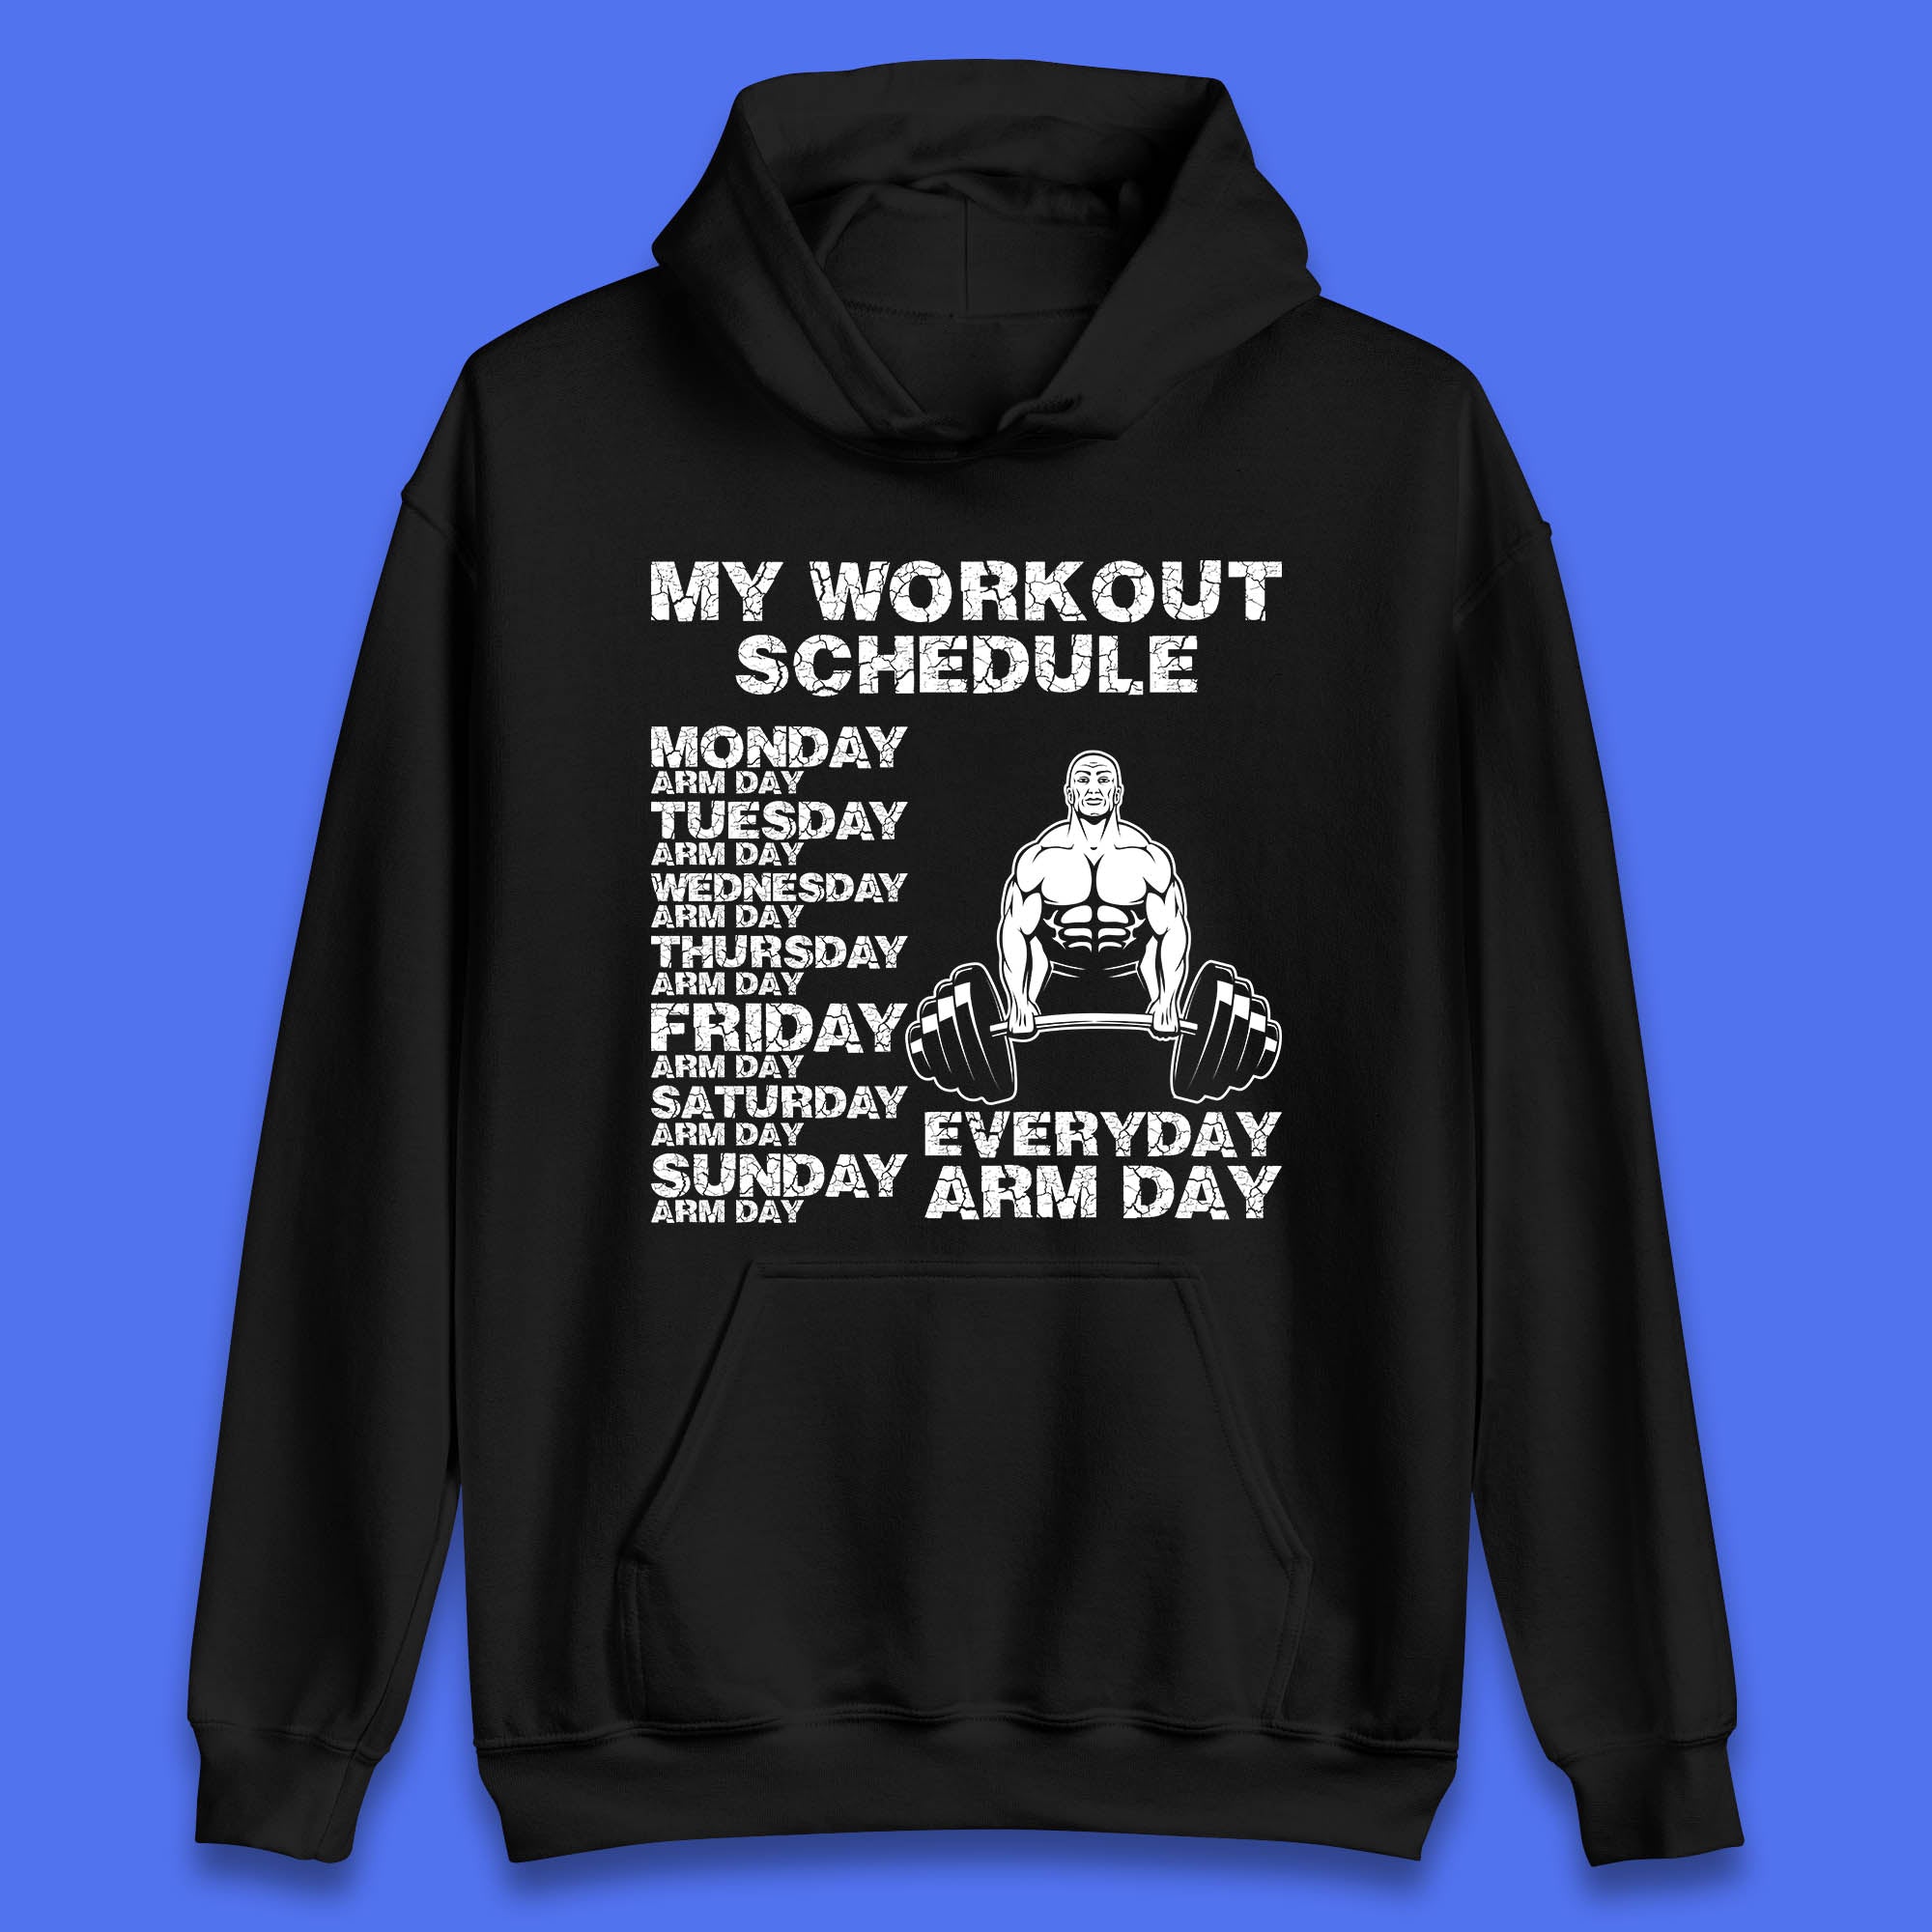 My Workout Schedule Everyday Arm Day Daily Routine  Arm Gym Workout Everyday Of Week Arm Day Fitness Unisex Hoodie